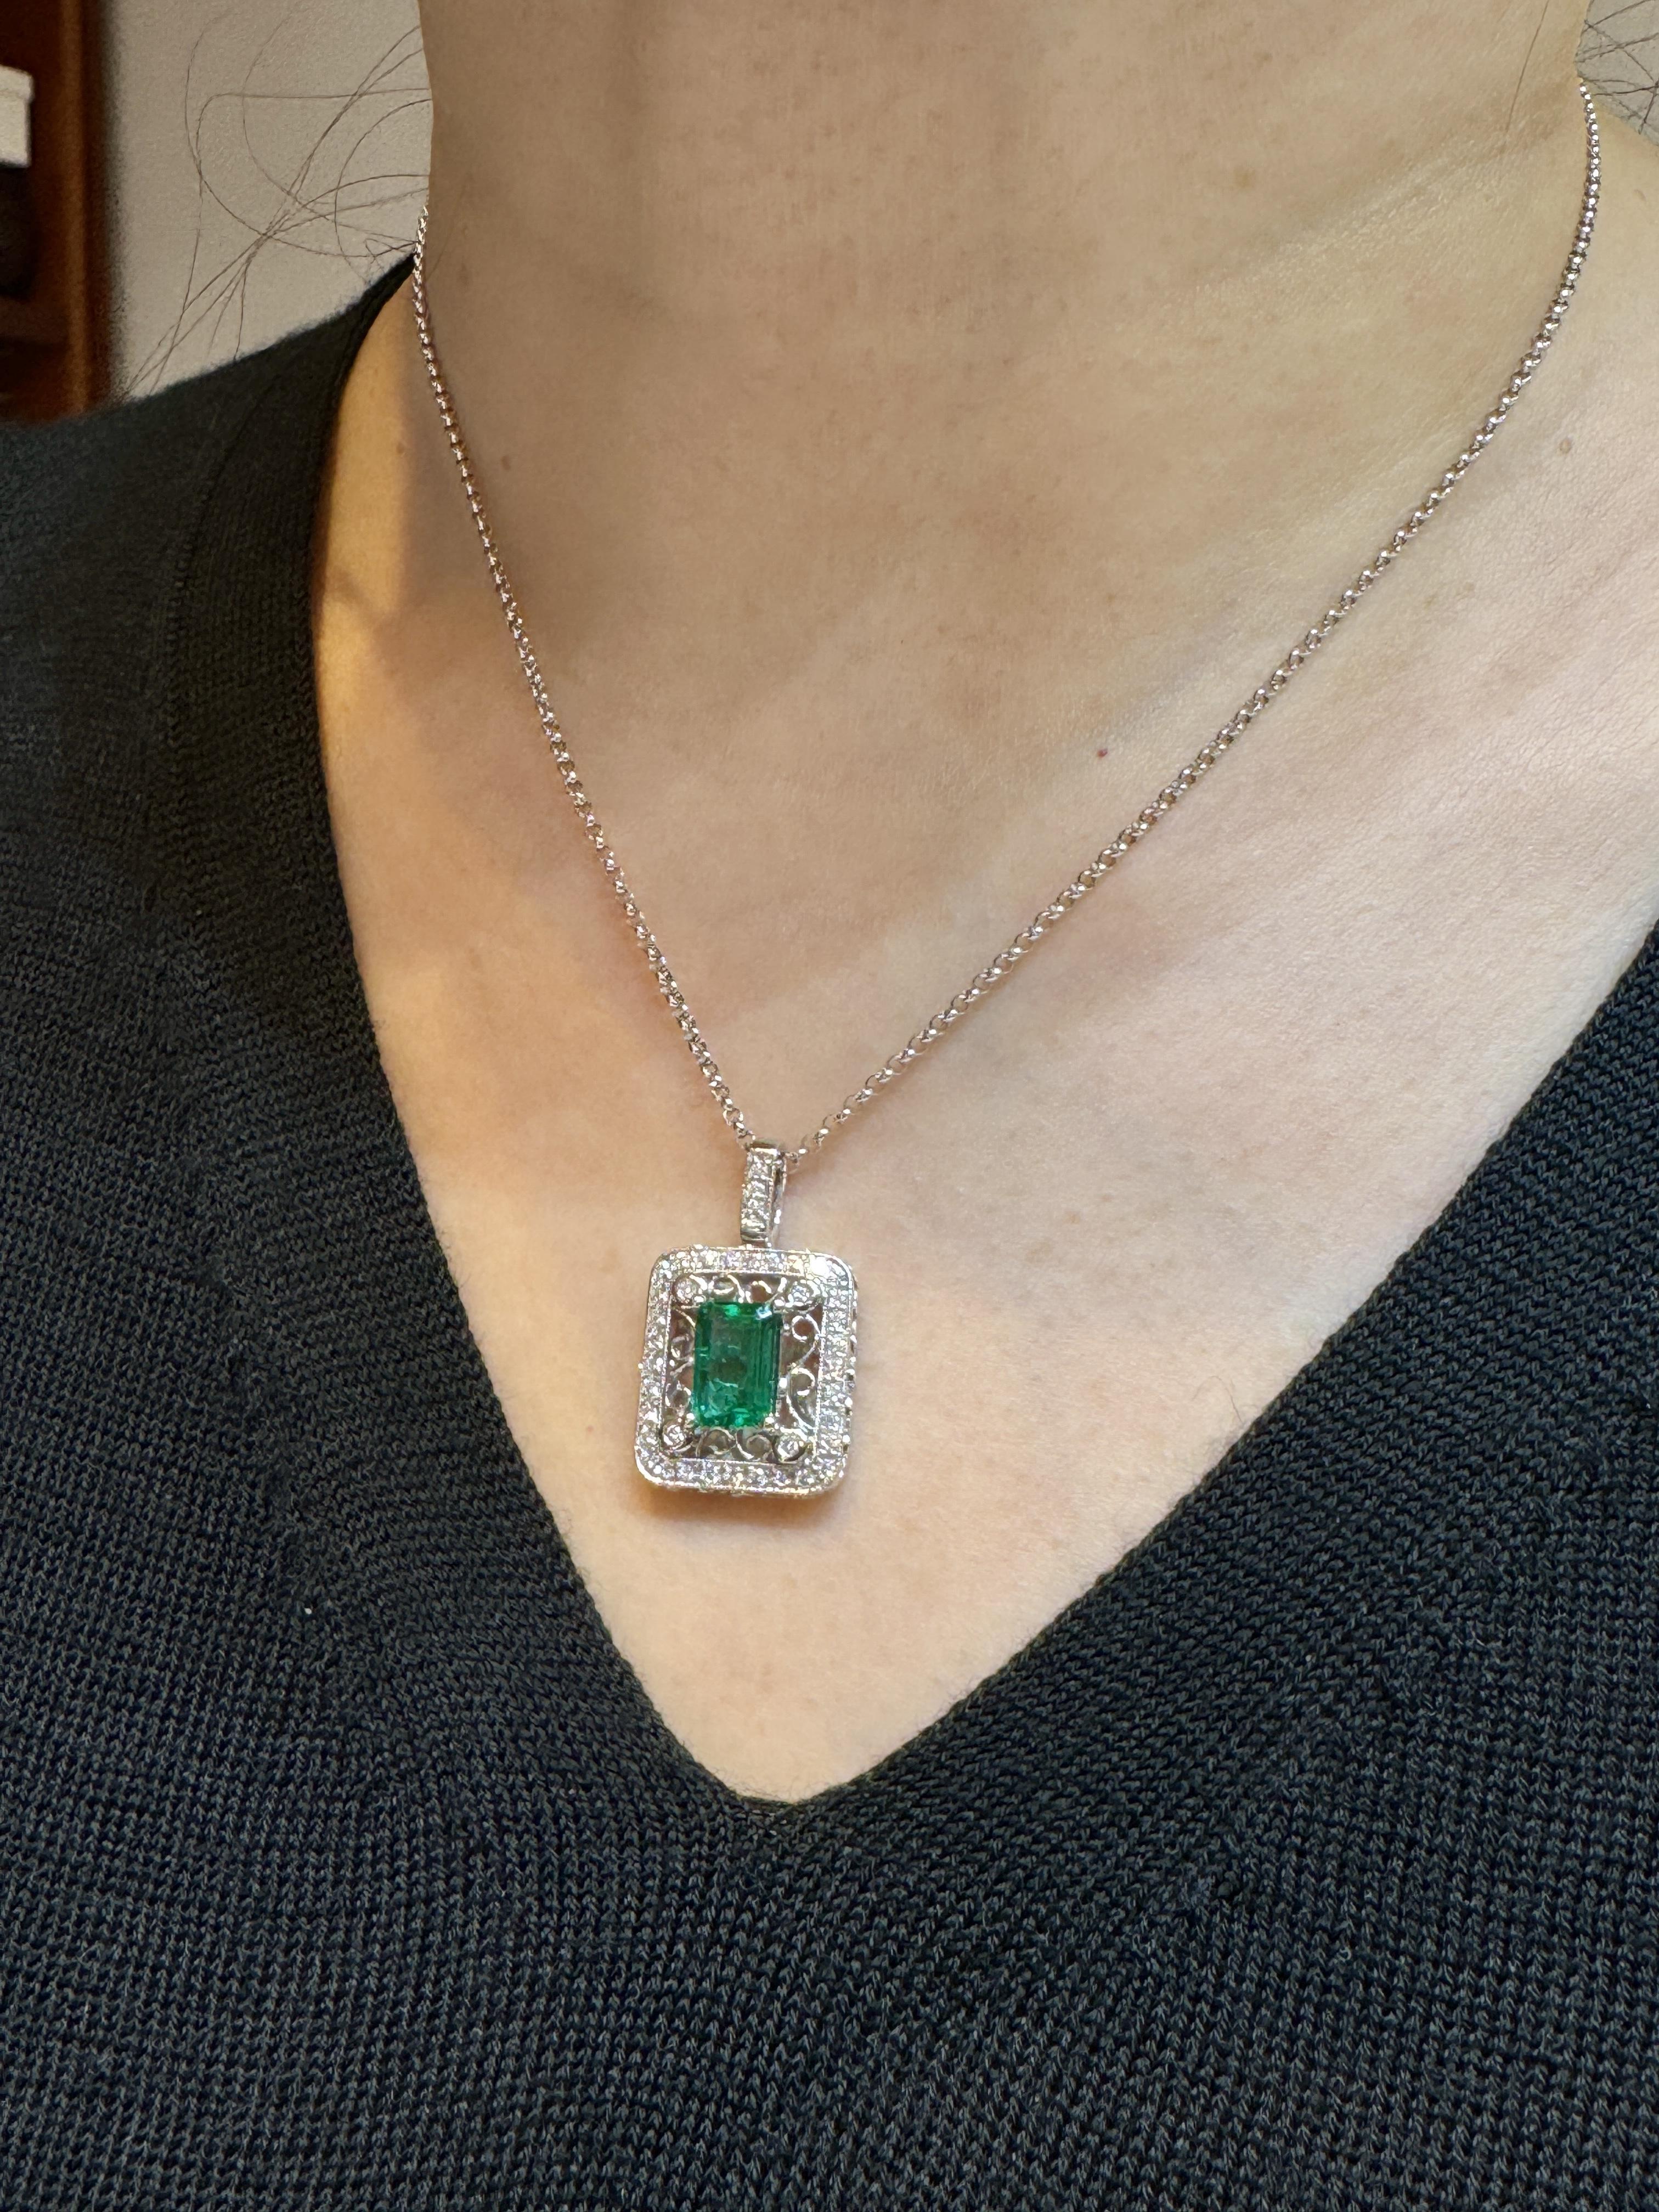 Art Deco GIA Certified 1.39 Carat Zambian Emerald and Diamond Floral Box Pendant Necklace For Sale